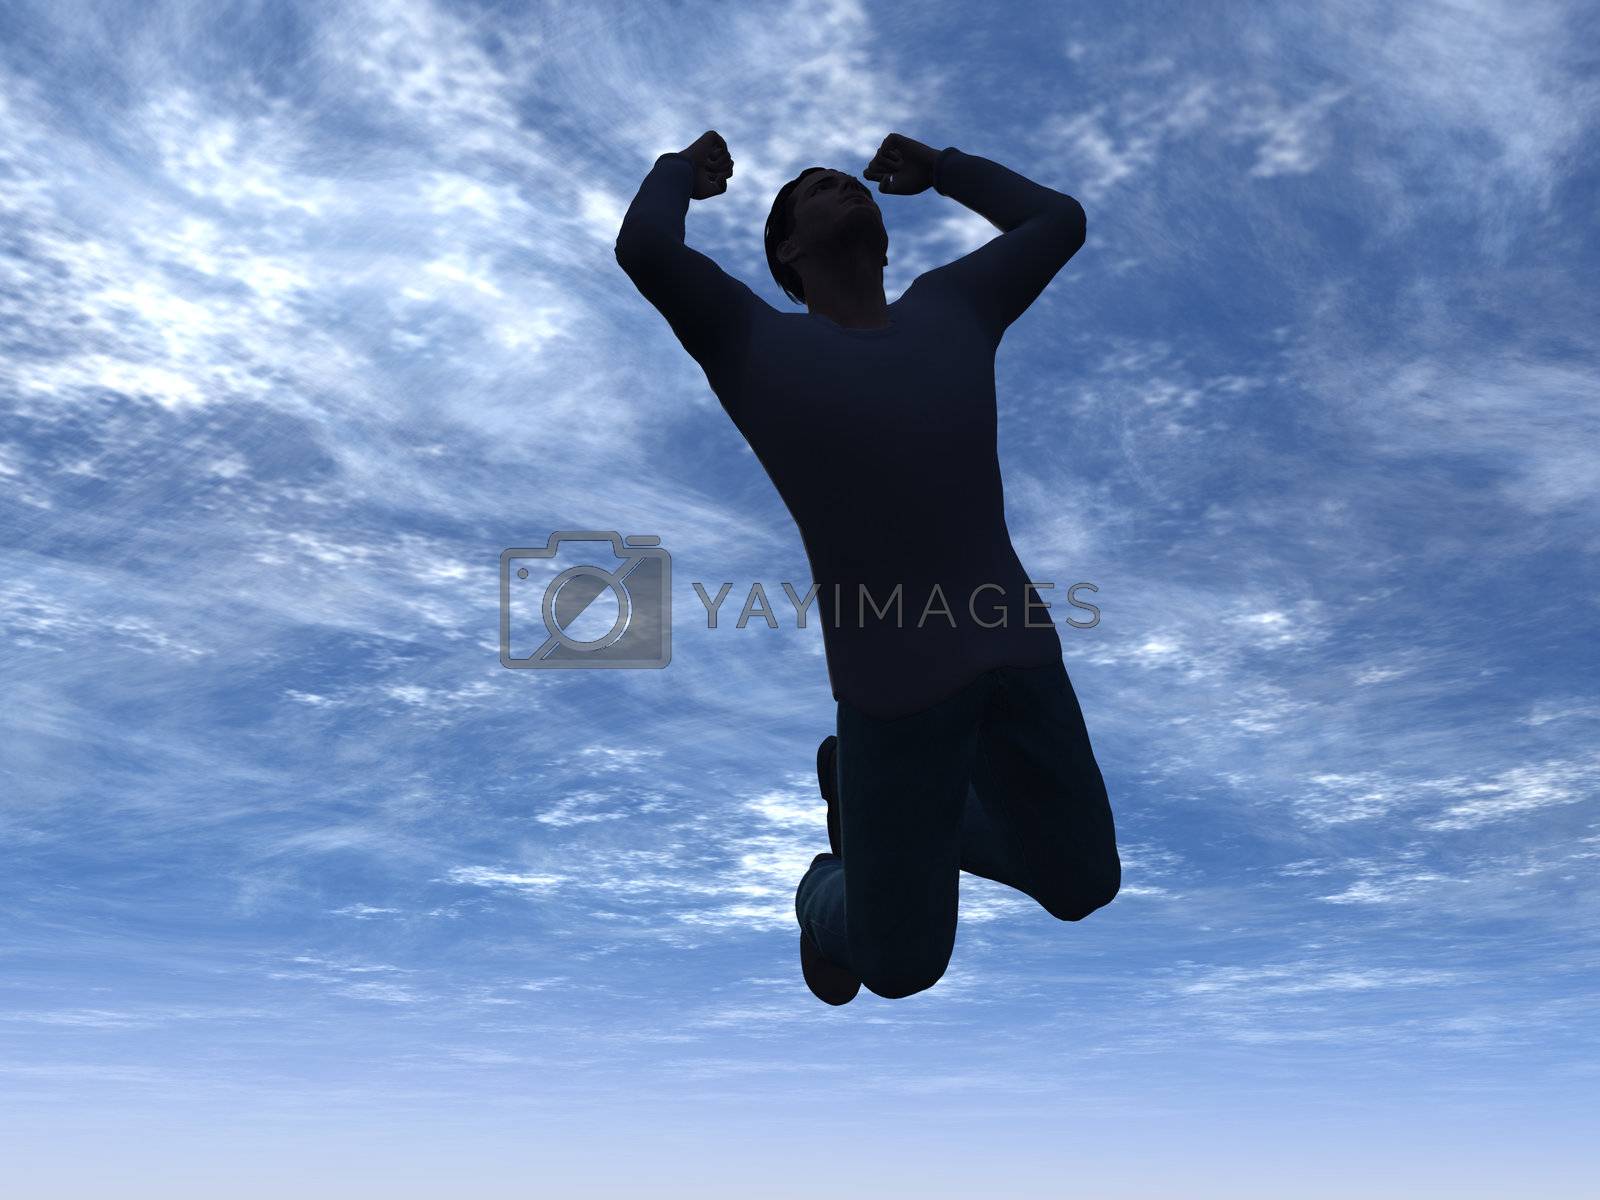 Royalty free image of jump by drizzd